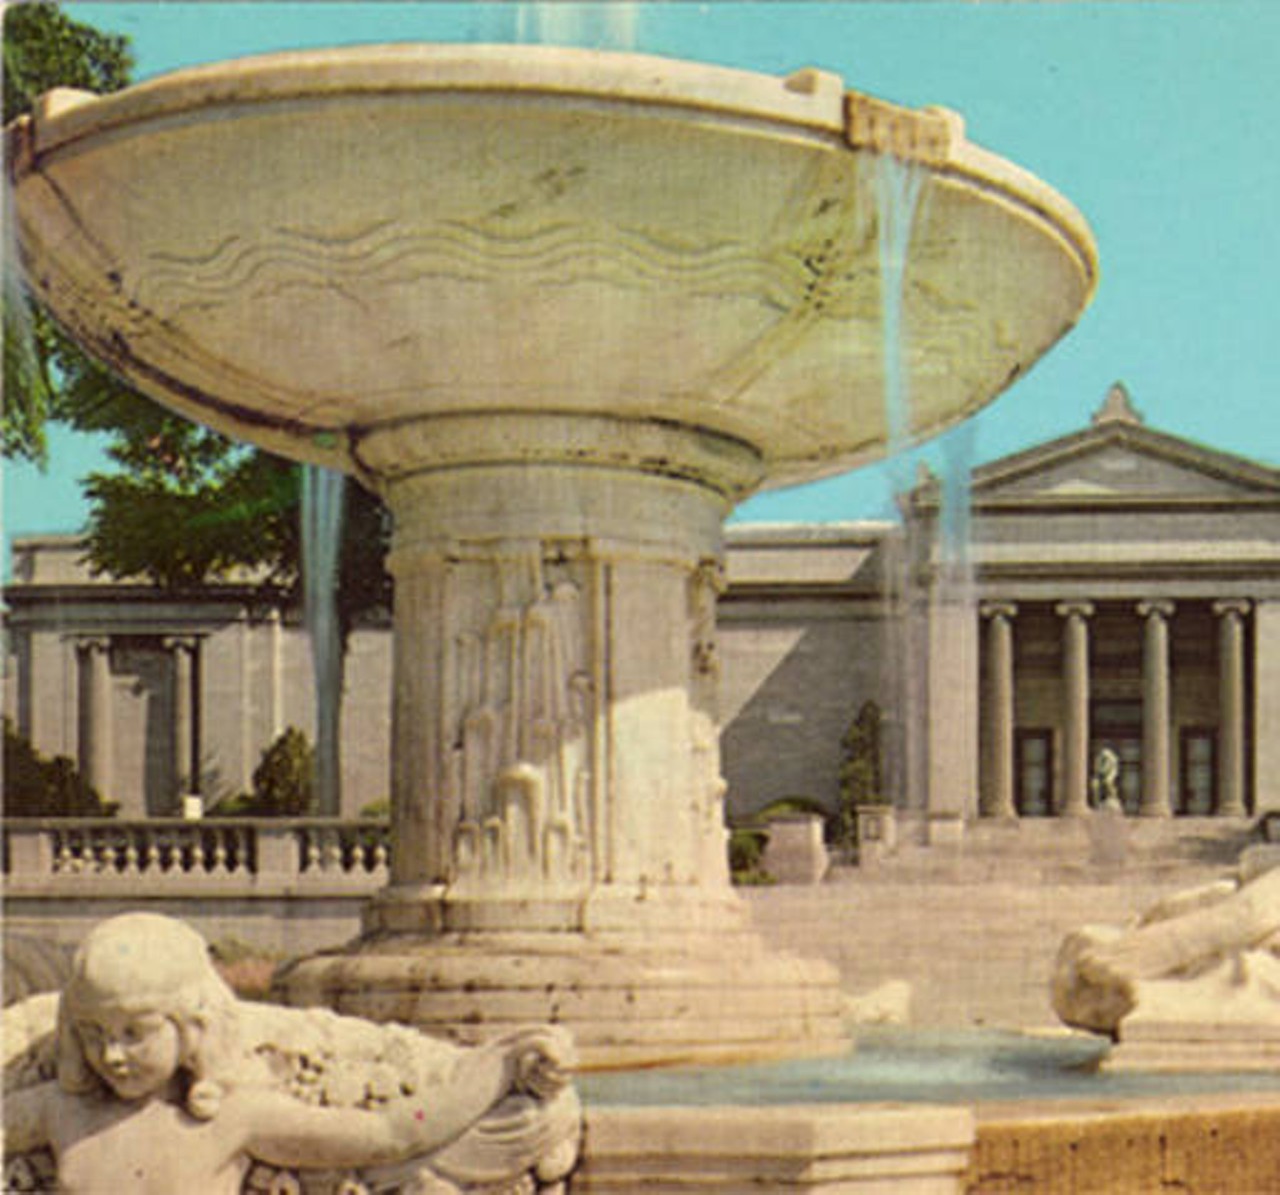 Cleveland Museum of Art, fountain close-up. c. 1960